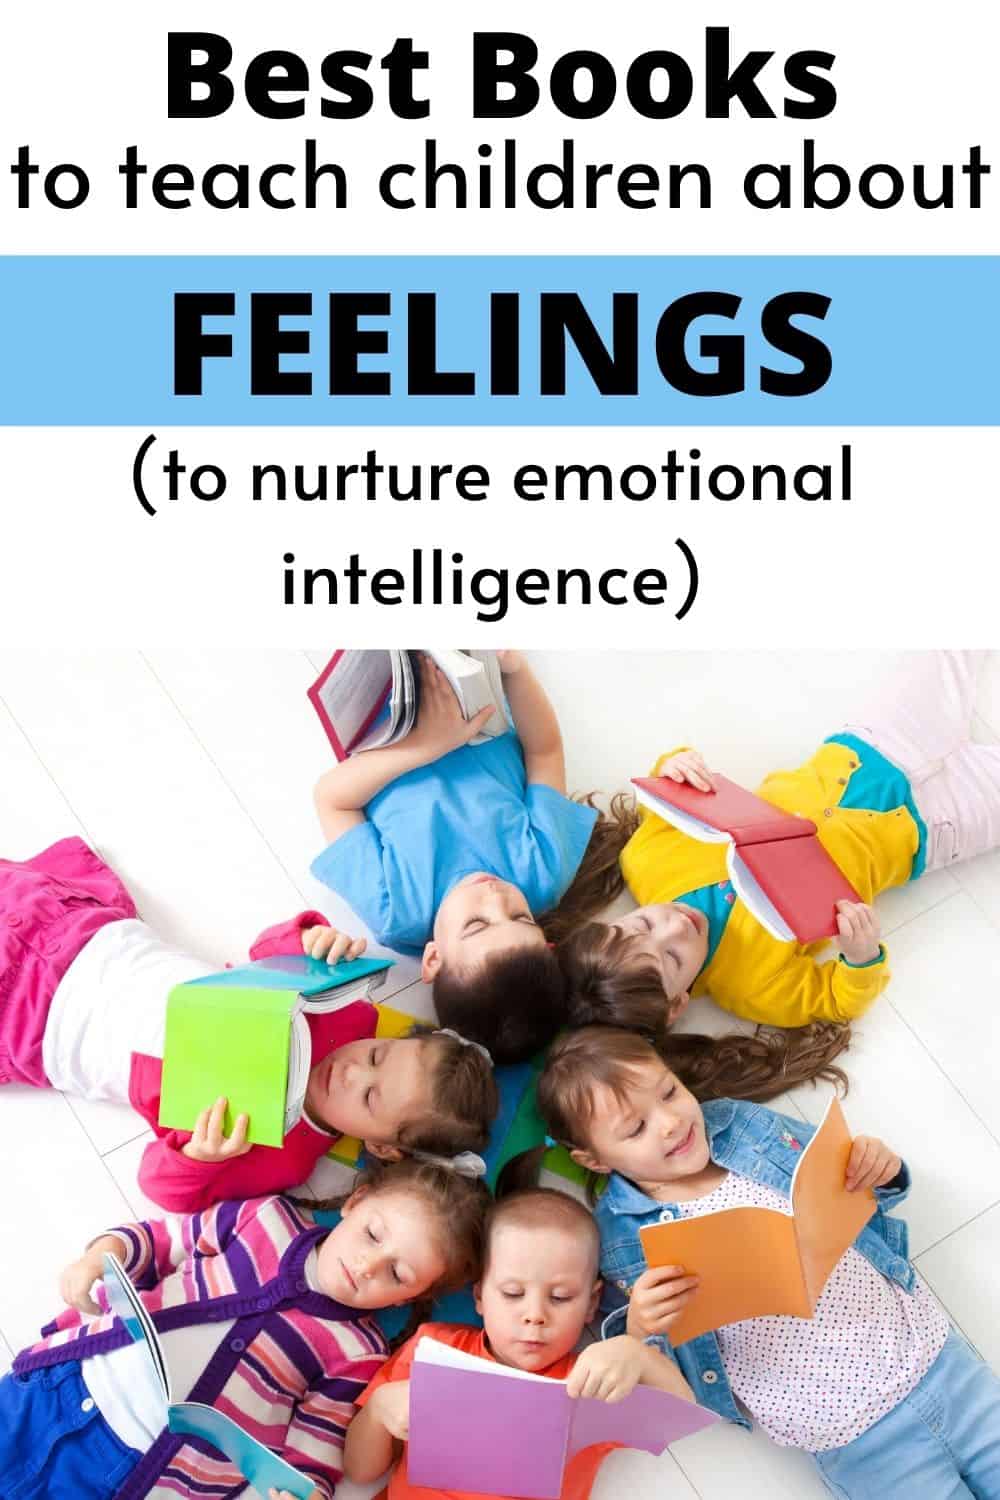 Best books to teach children about feelings (to nurture emotional intellgience)